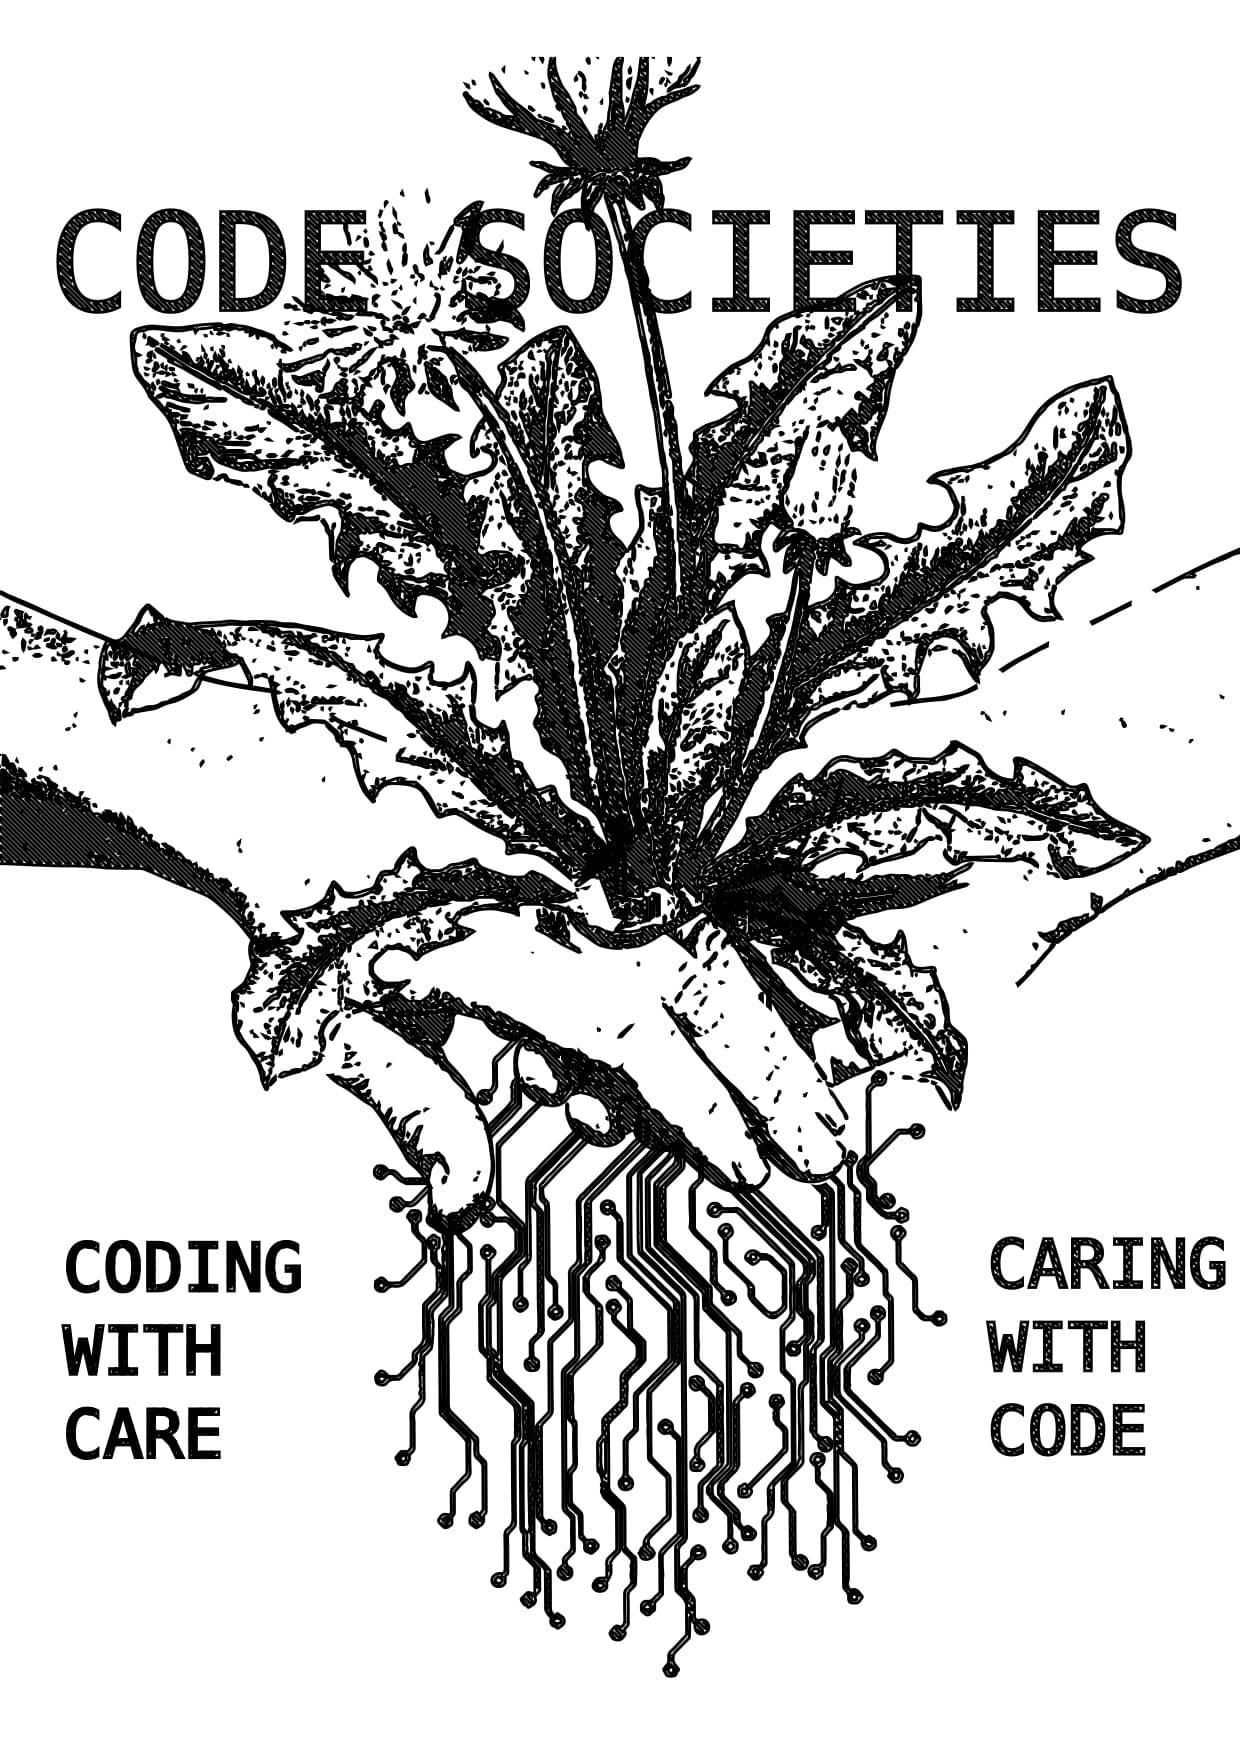 Code Societies poster made by AC Gilette